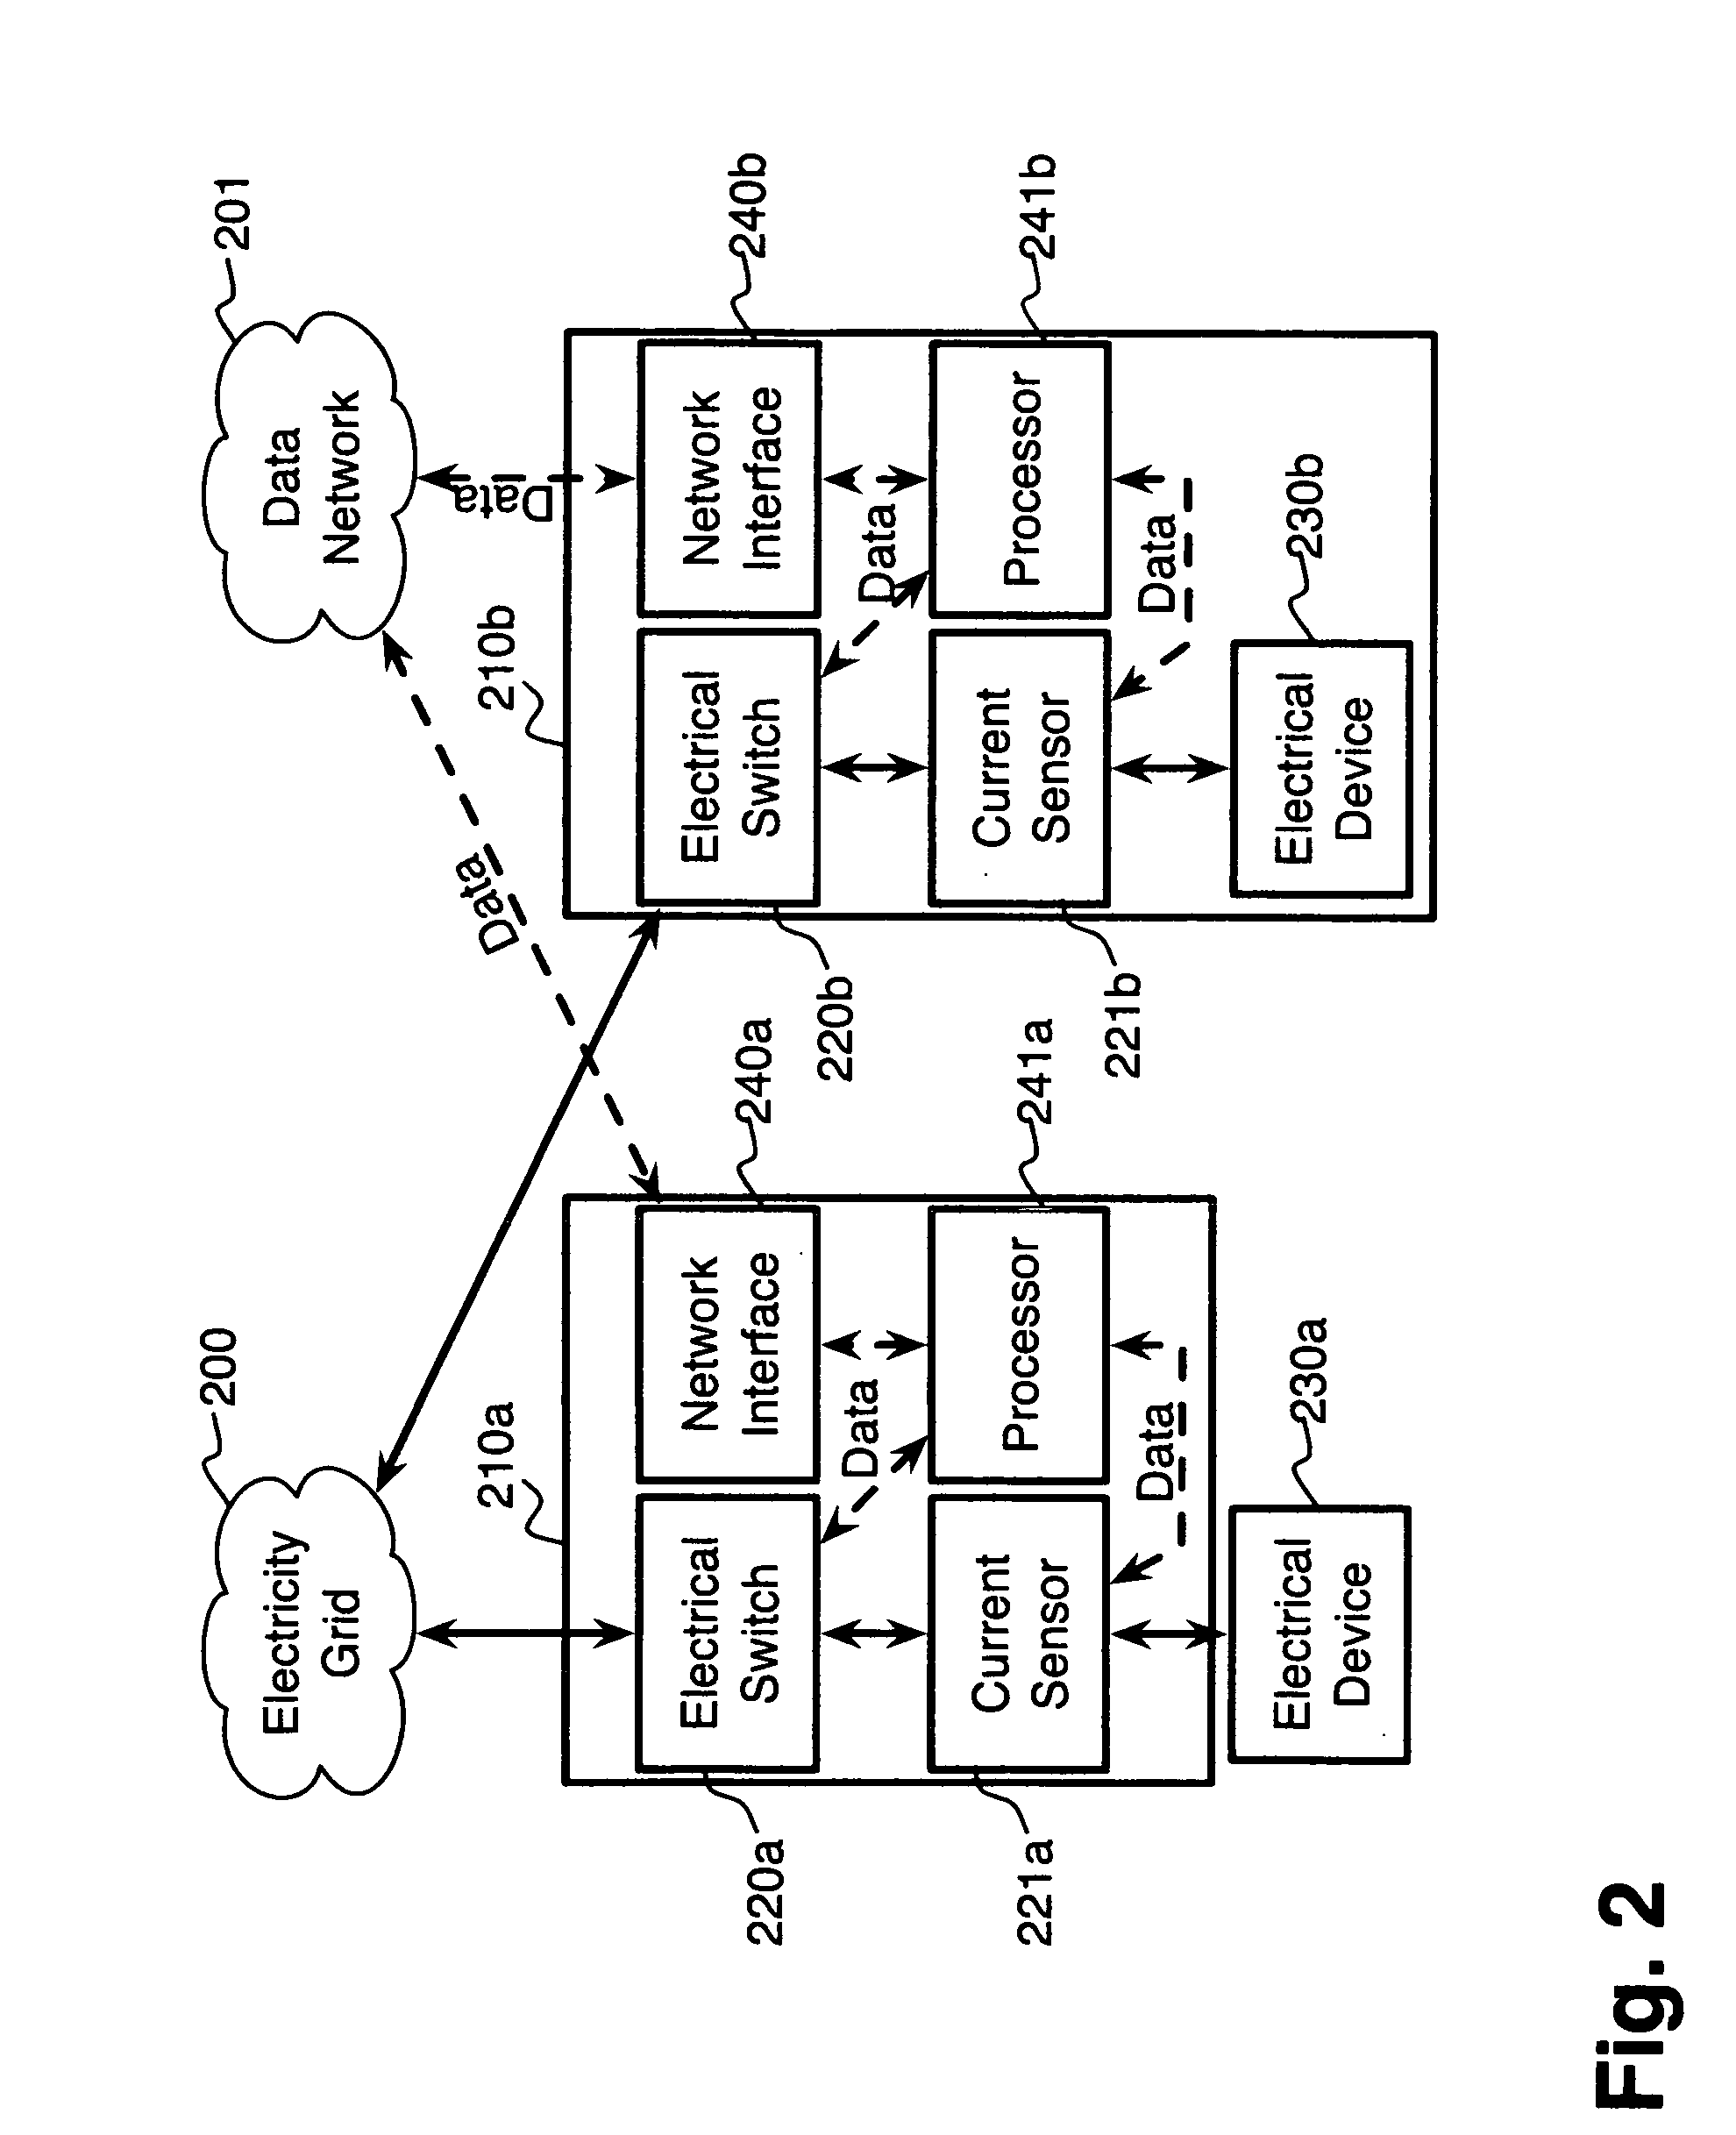 System and method for single-action energy resource scheduling and participation in energy-related securities